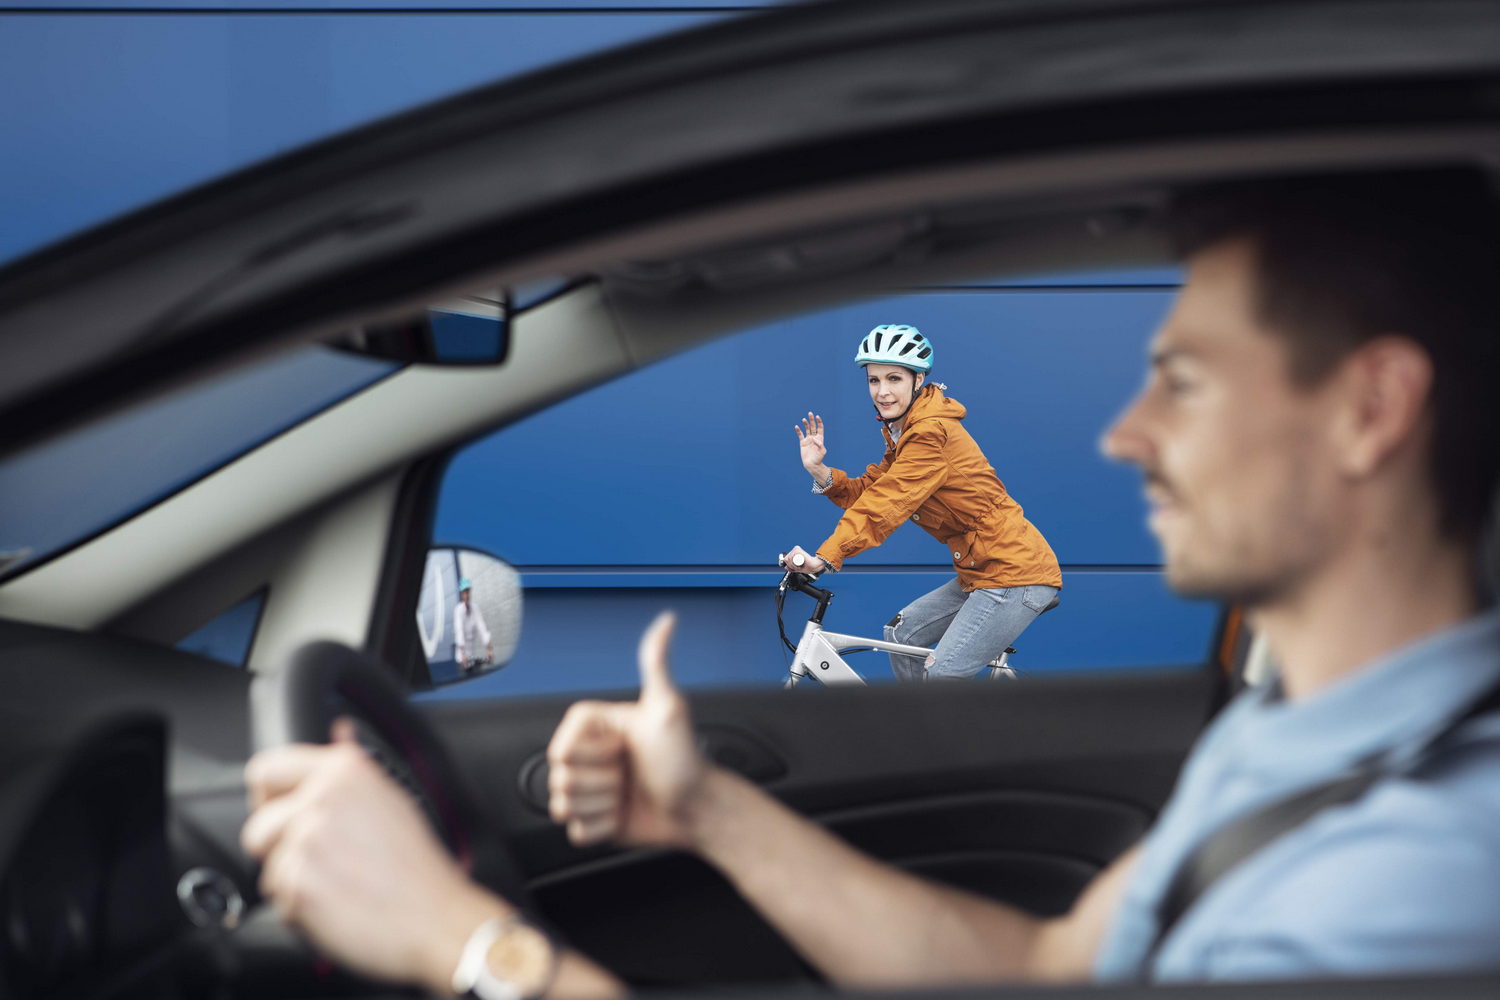 Keeping cyclists and pedestrians safe